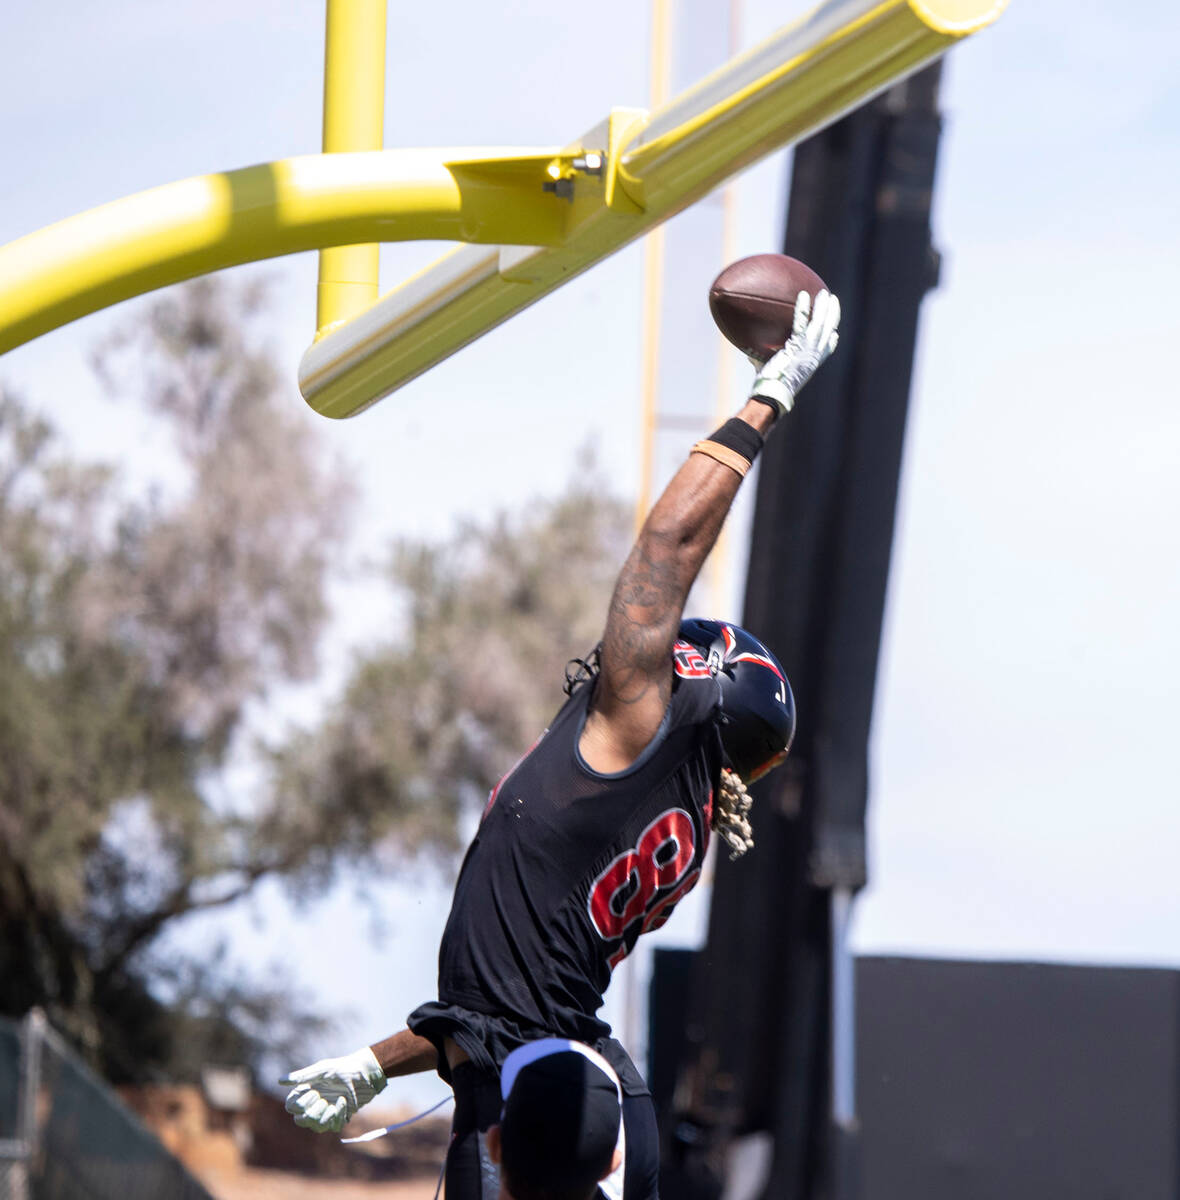 Vegas Vipers tight end Cam Sutton (89) spikes the ball over the uprights after scoring during t ...